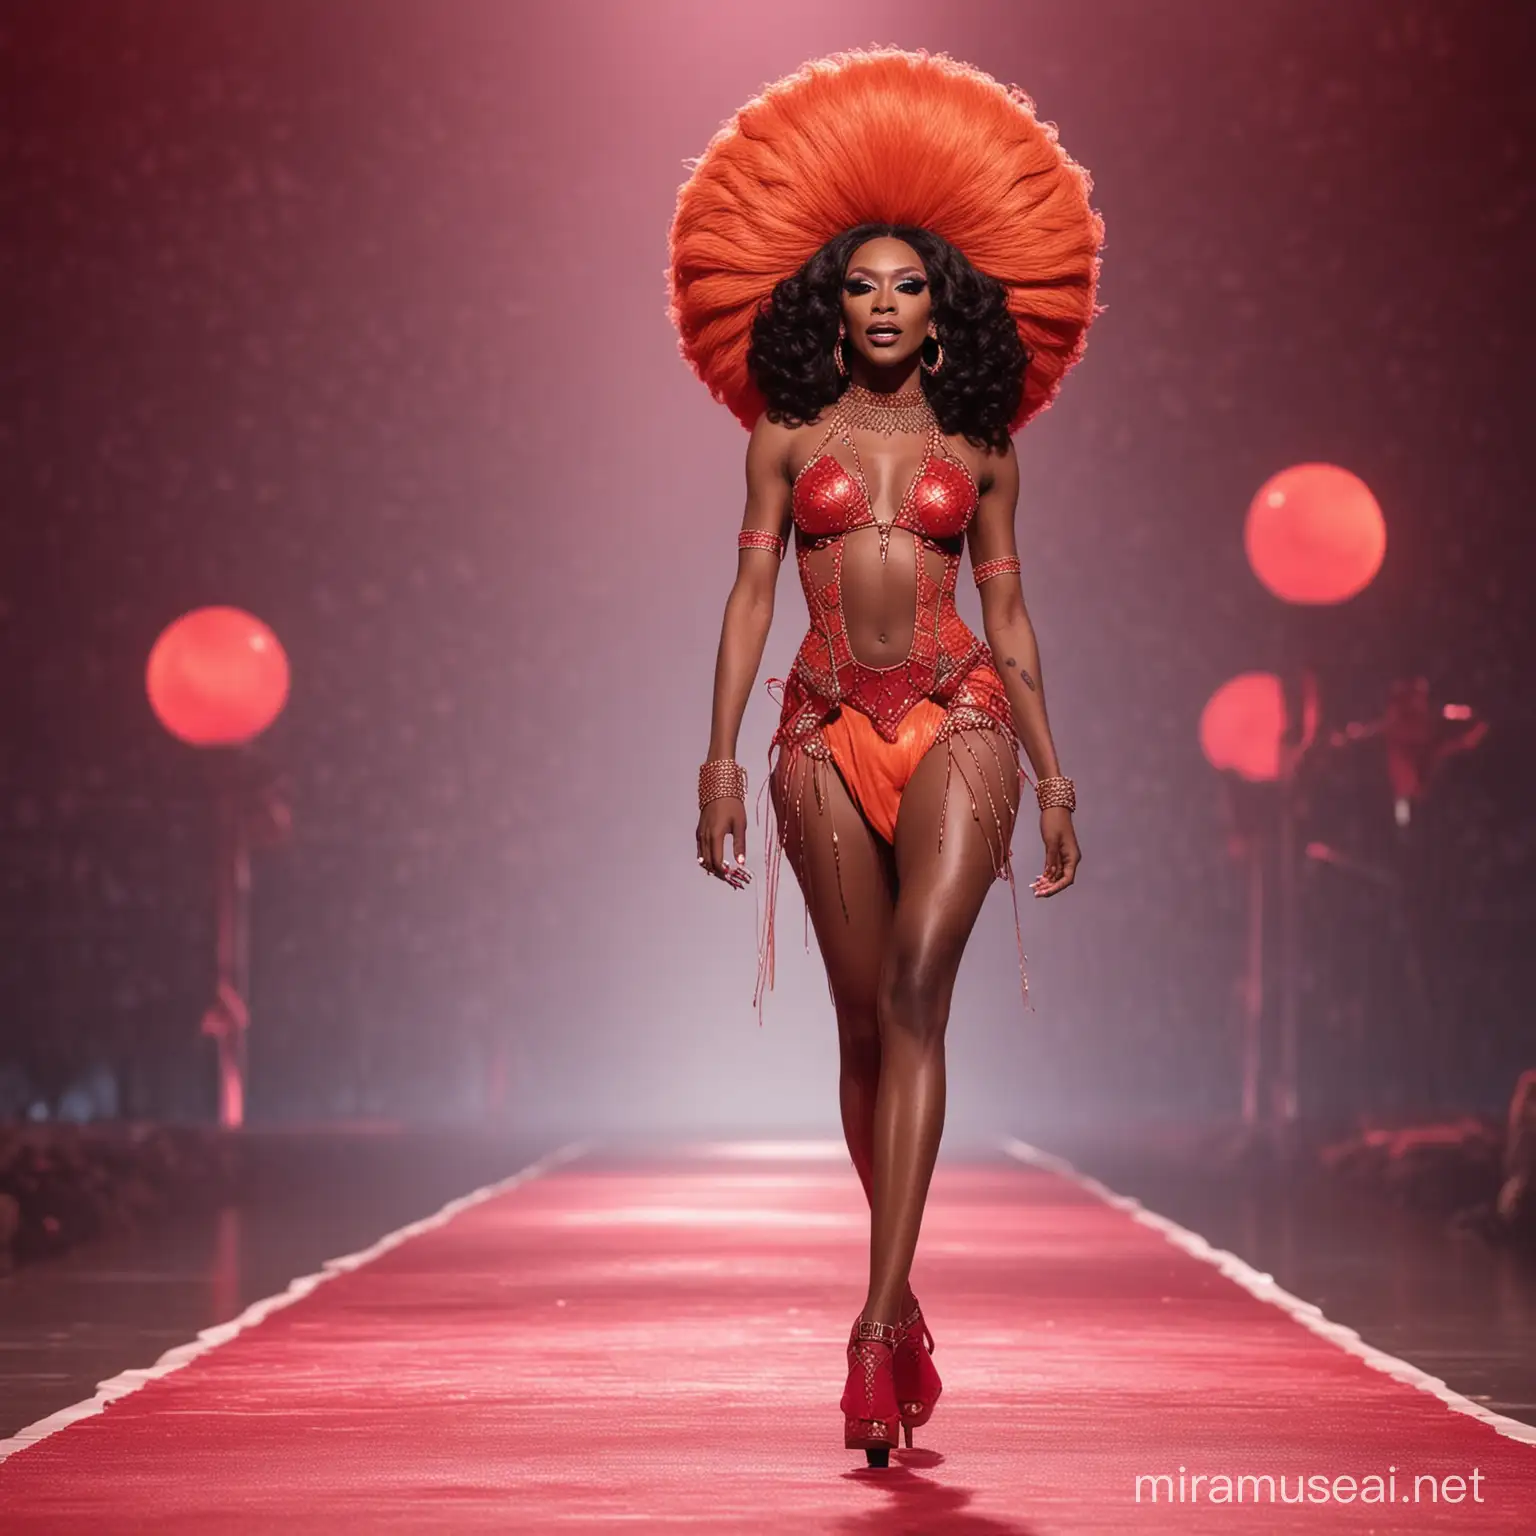 a full body image of a skinny african drag queen walking on the Rupaul's Drag race runway wearing an outfit inspired by the prompt: bloodmoon beauty